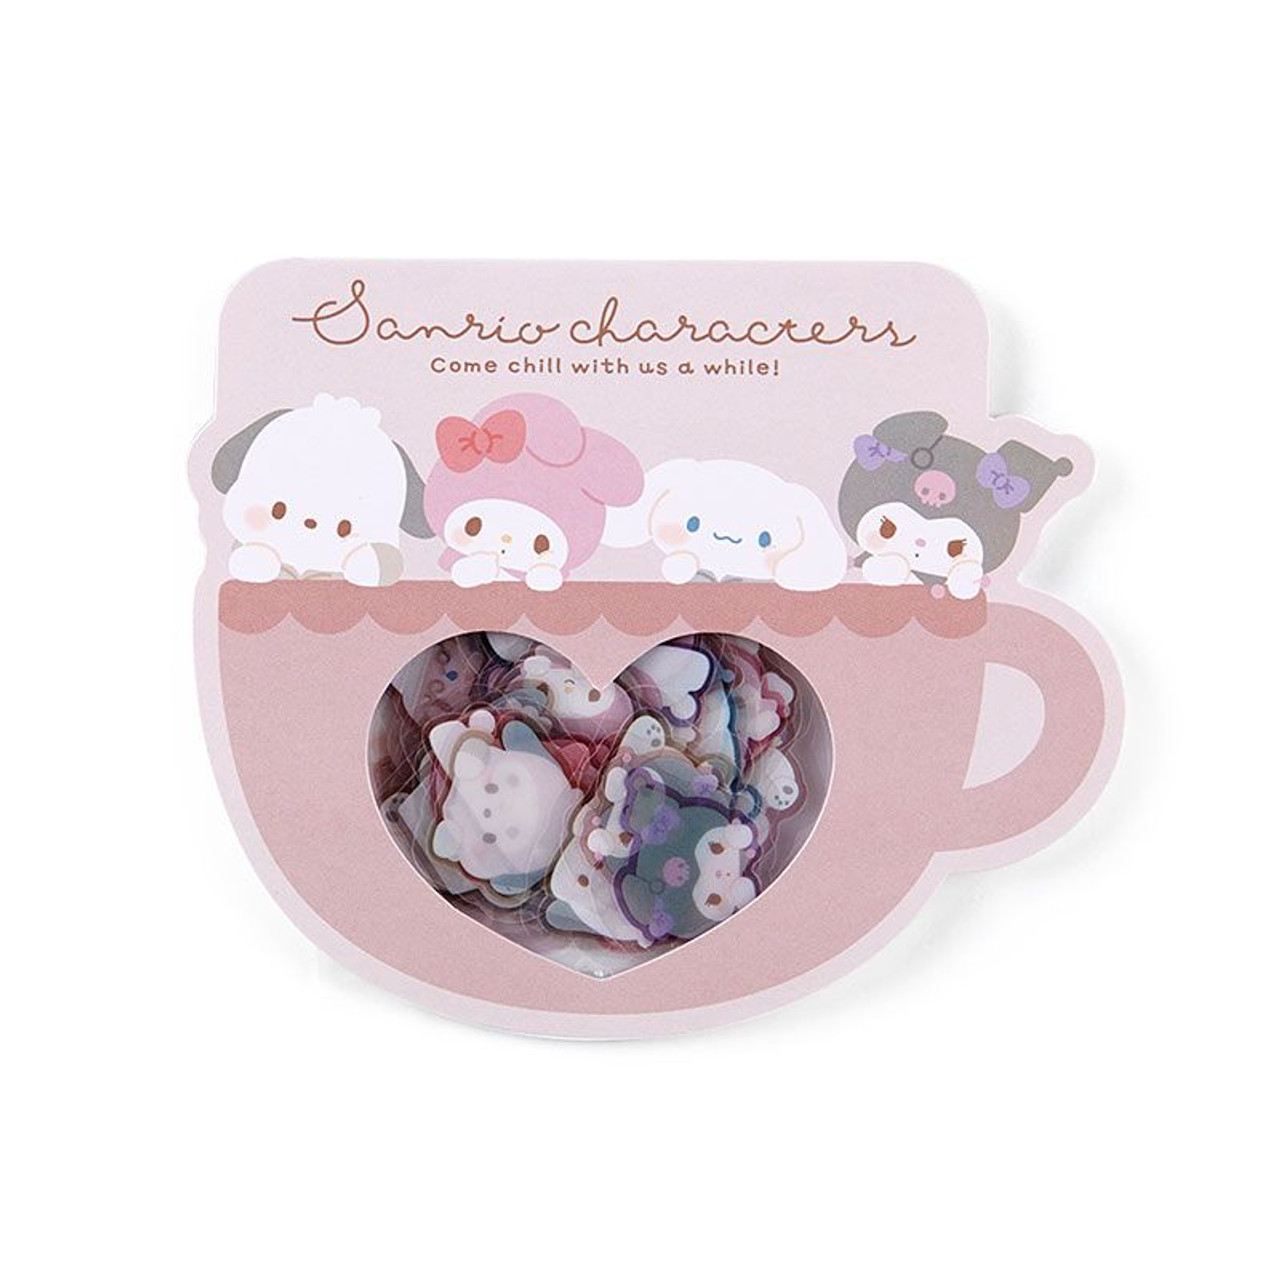 Sanrio Characters Sticker Pack - Chill Time